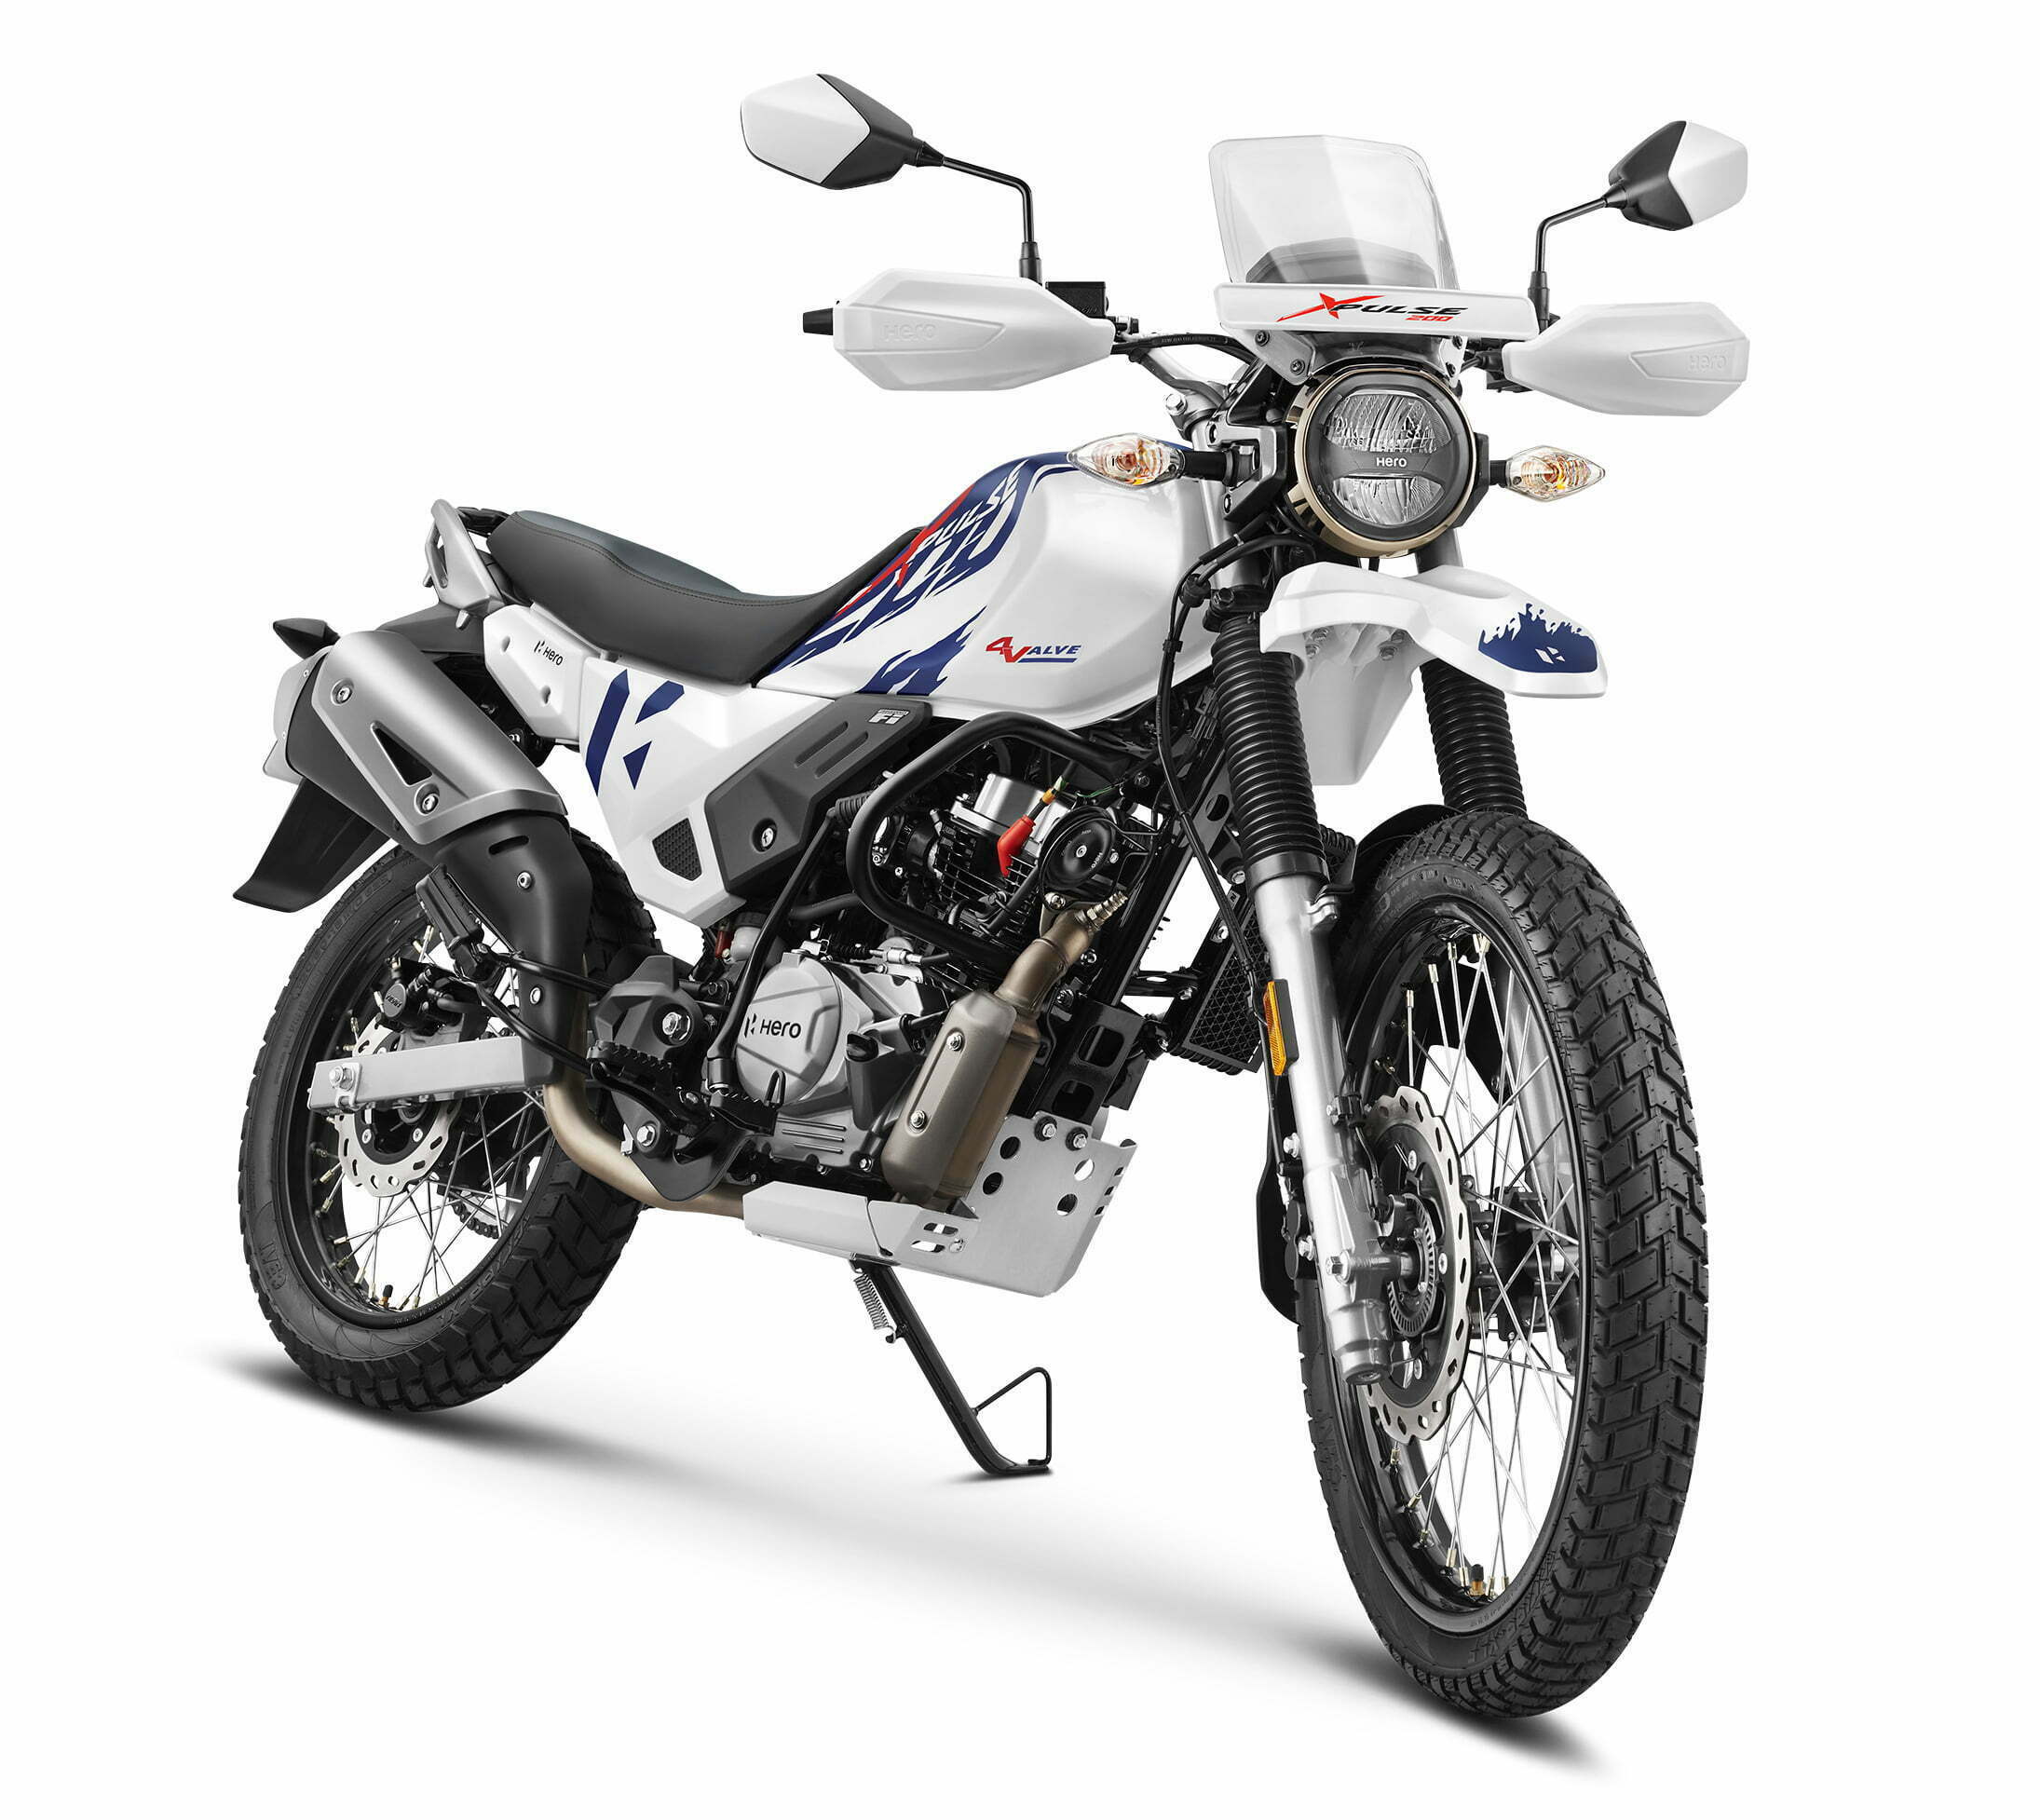 2021 Hero XPulse 200 4 Valve Launched With More Power! (2)